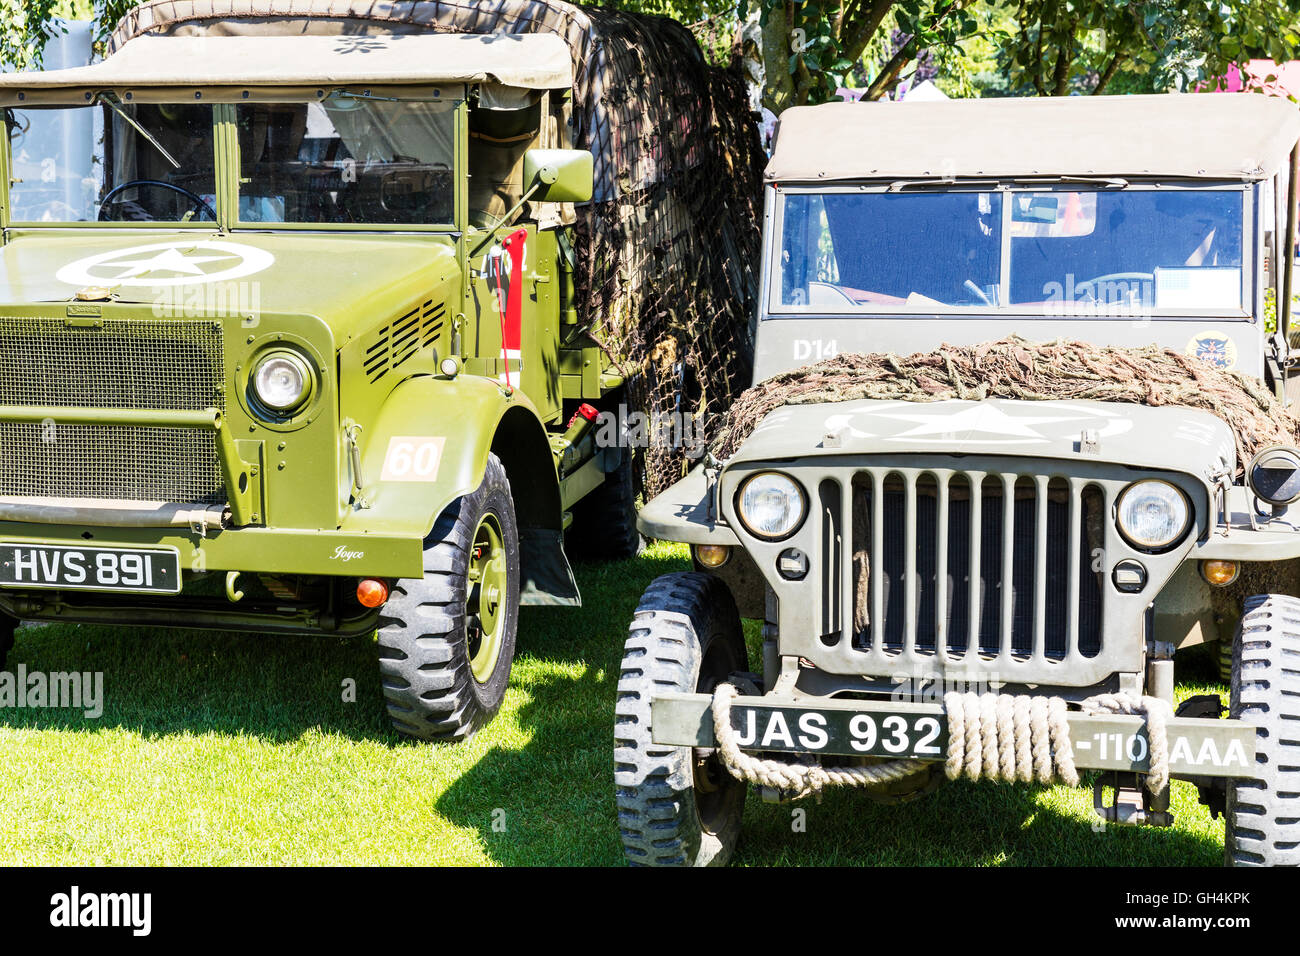 Us Usa Military Vehicles Ford Light Utility 4x4 Jeep Bedford Truck Stock Photo Alamy